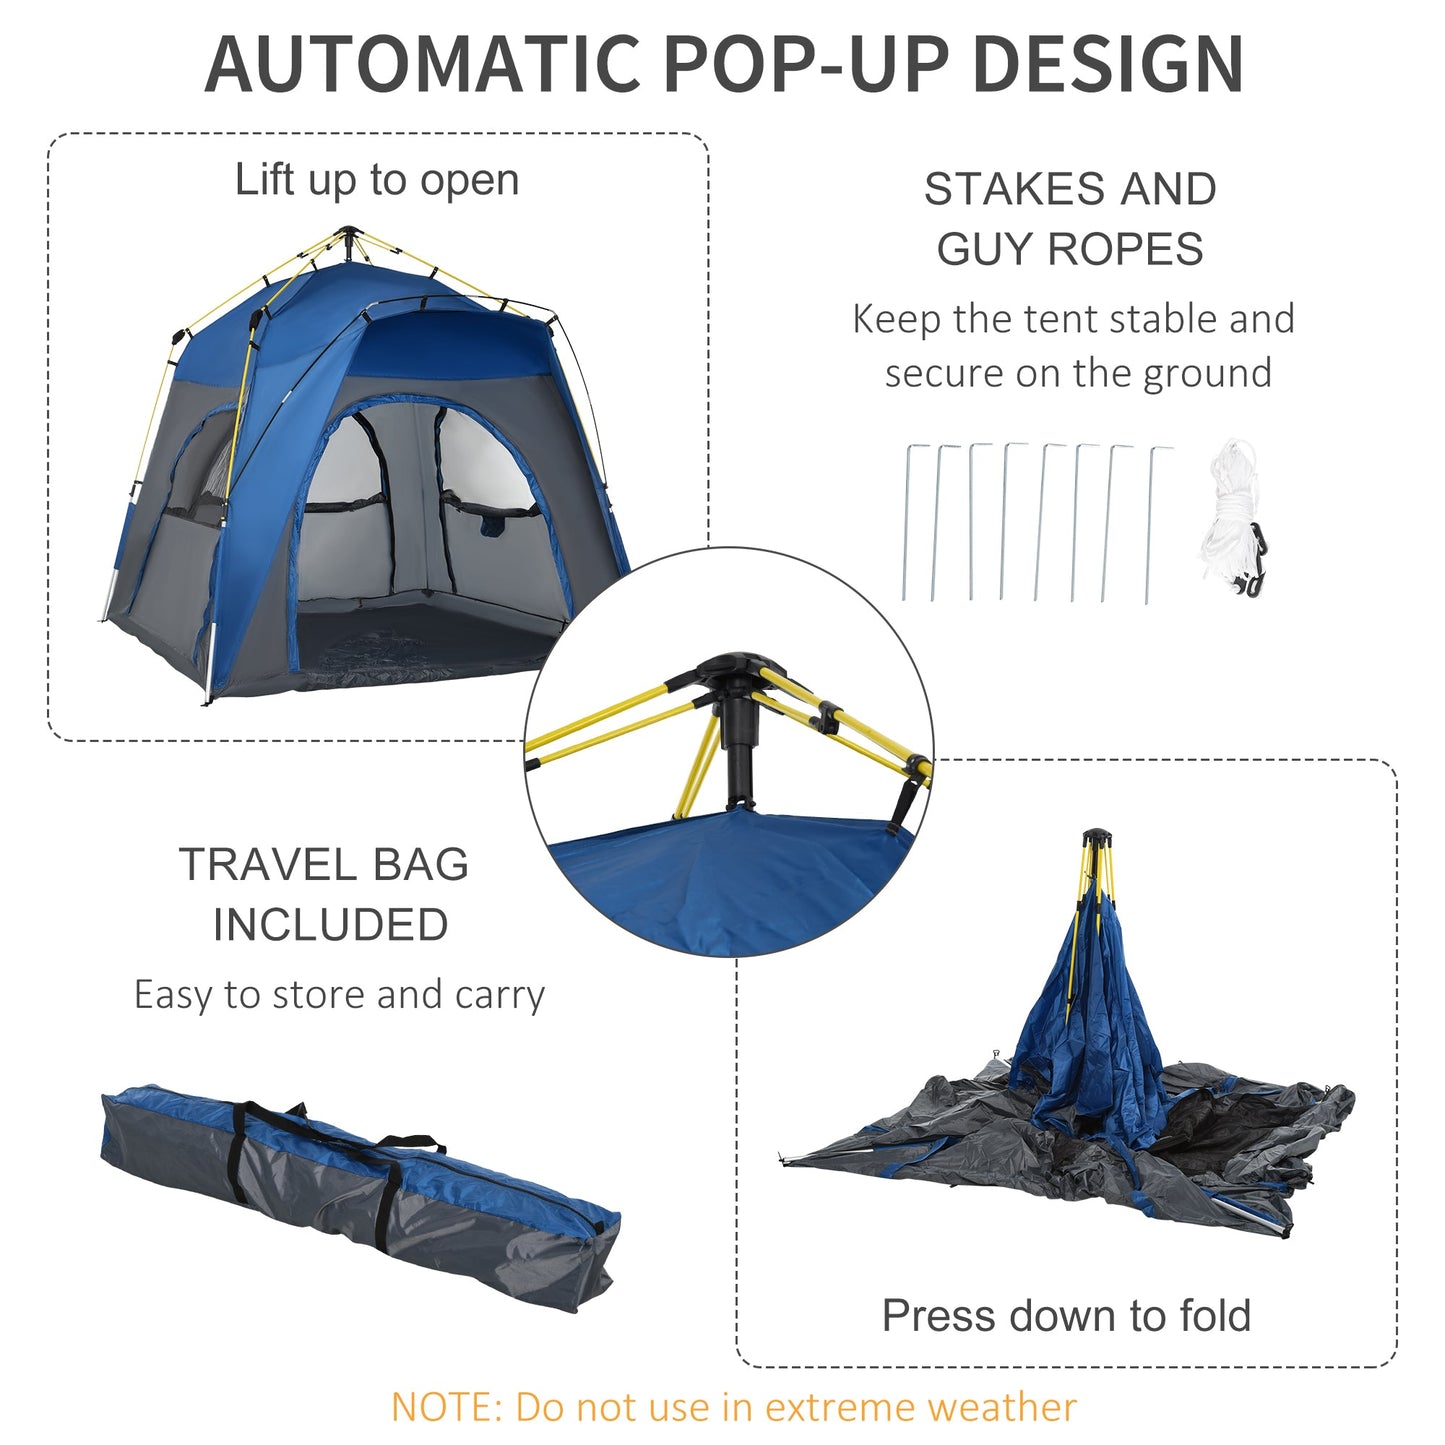 Miscellaneous-Camping Tents 4 Person Pop Up Tent Quick Setup Automatic Hydraulic Family Travel Tent w/ Windows, Doors Carry Bag Included - Outdoor Style Company